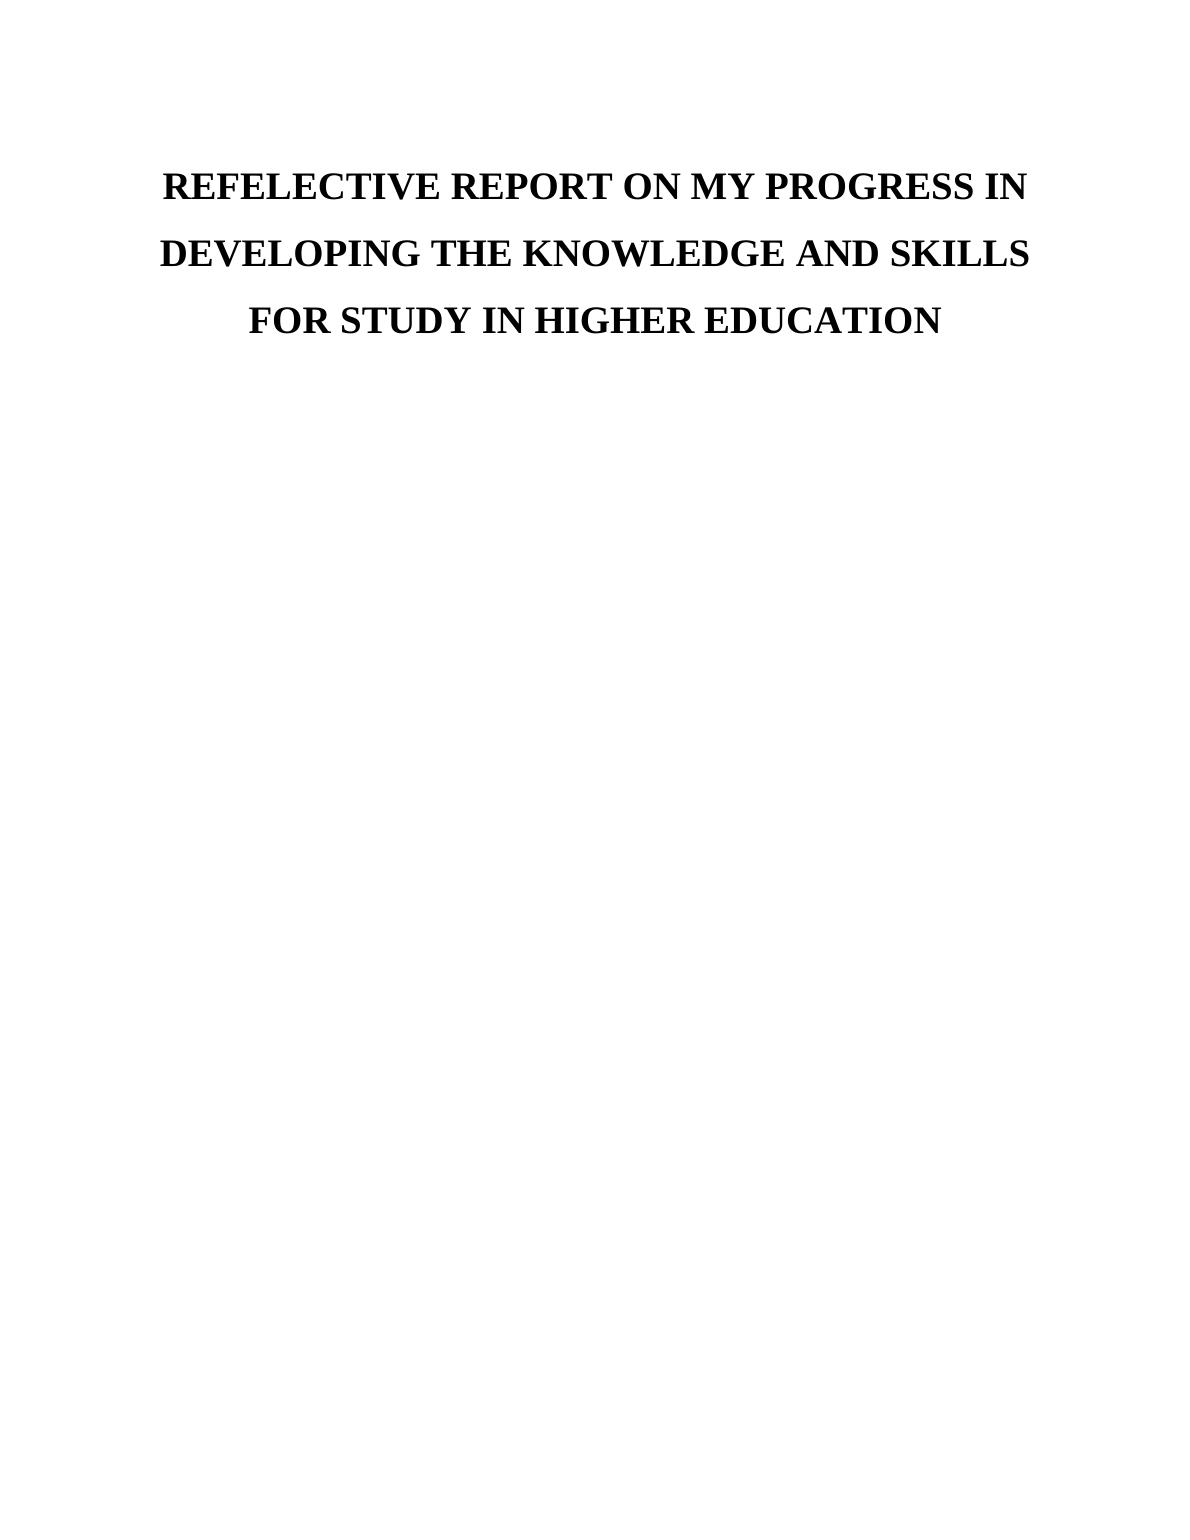 Refelective Report on Developing Skills Project_1